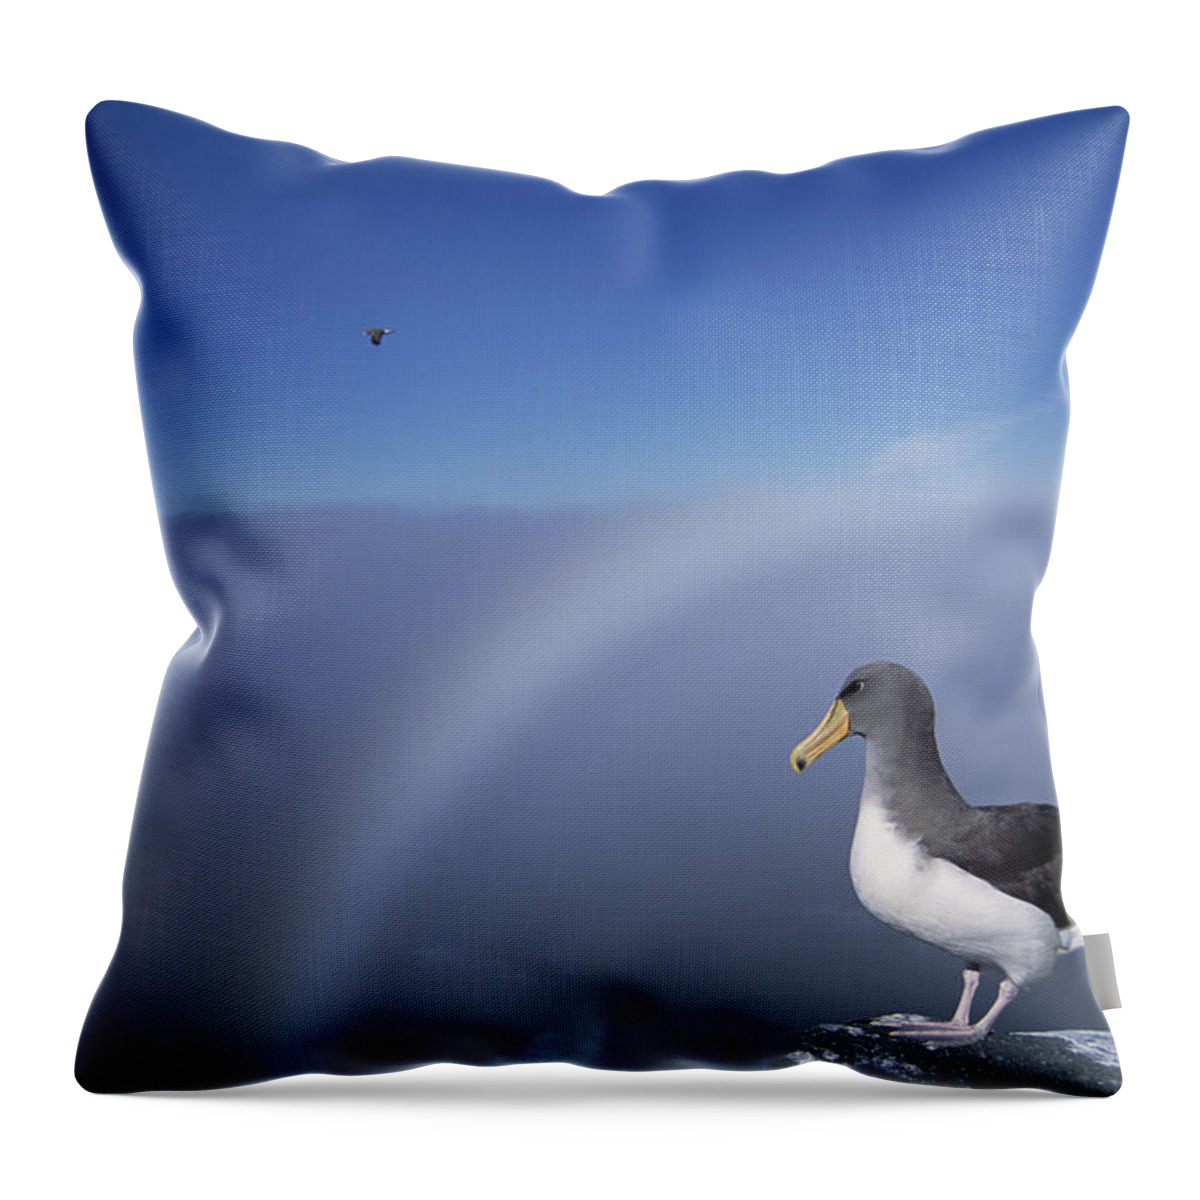 Feb0514 Throw Pillow featuring the photograph Chatham Albatross On Cliff Edge Chatham by Tui De Roy